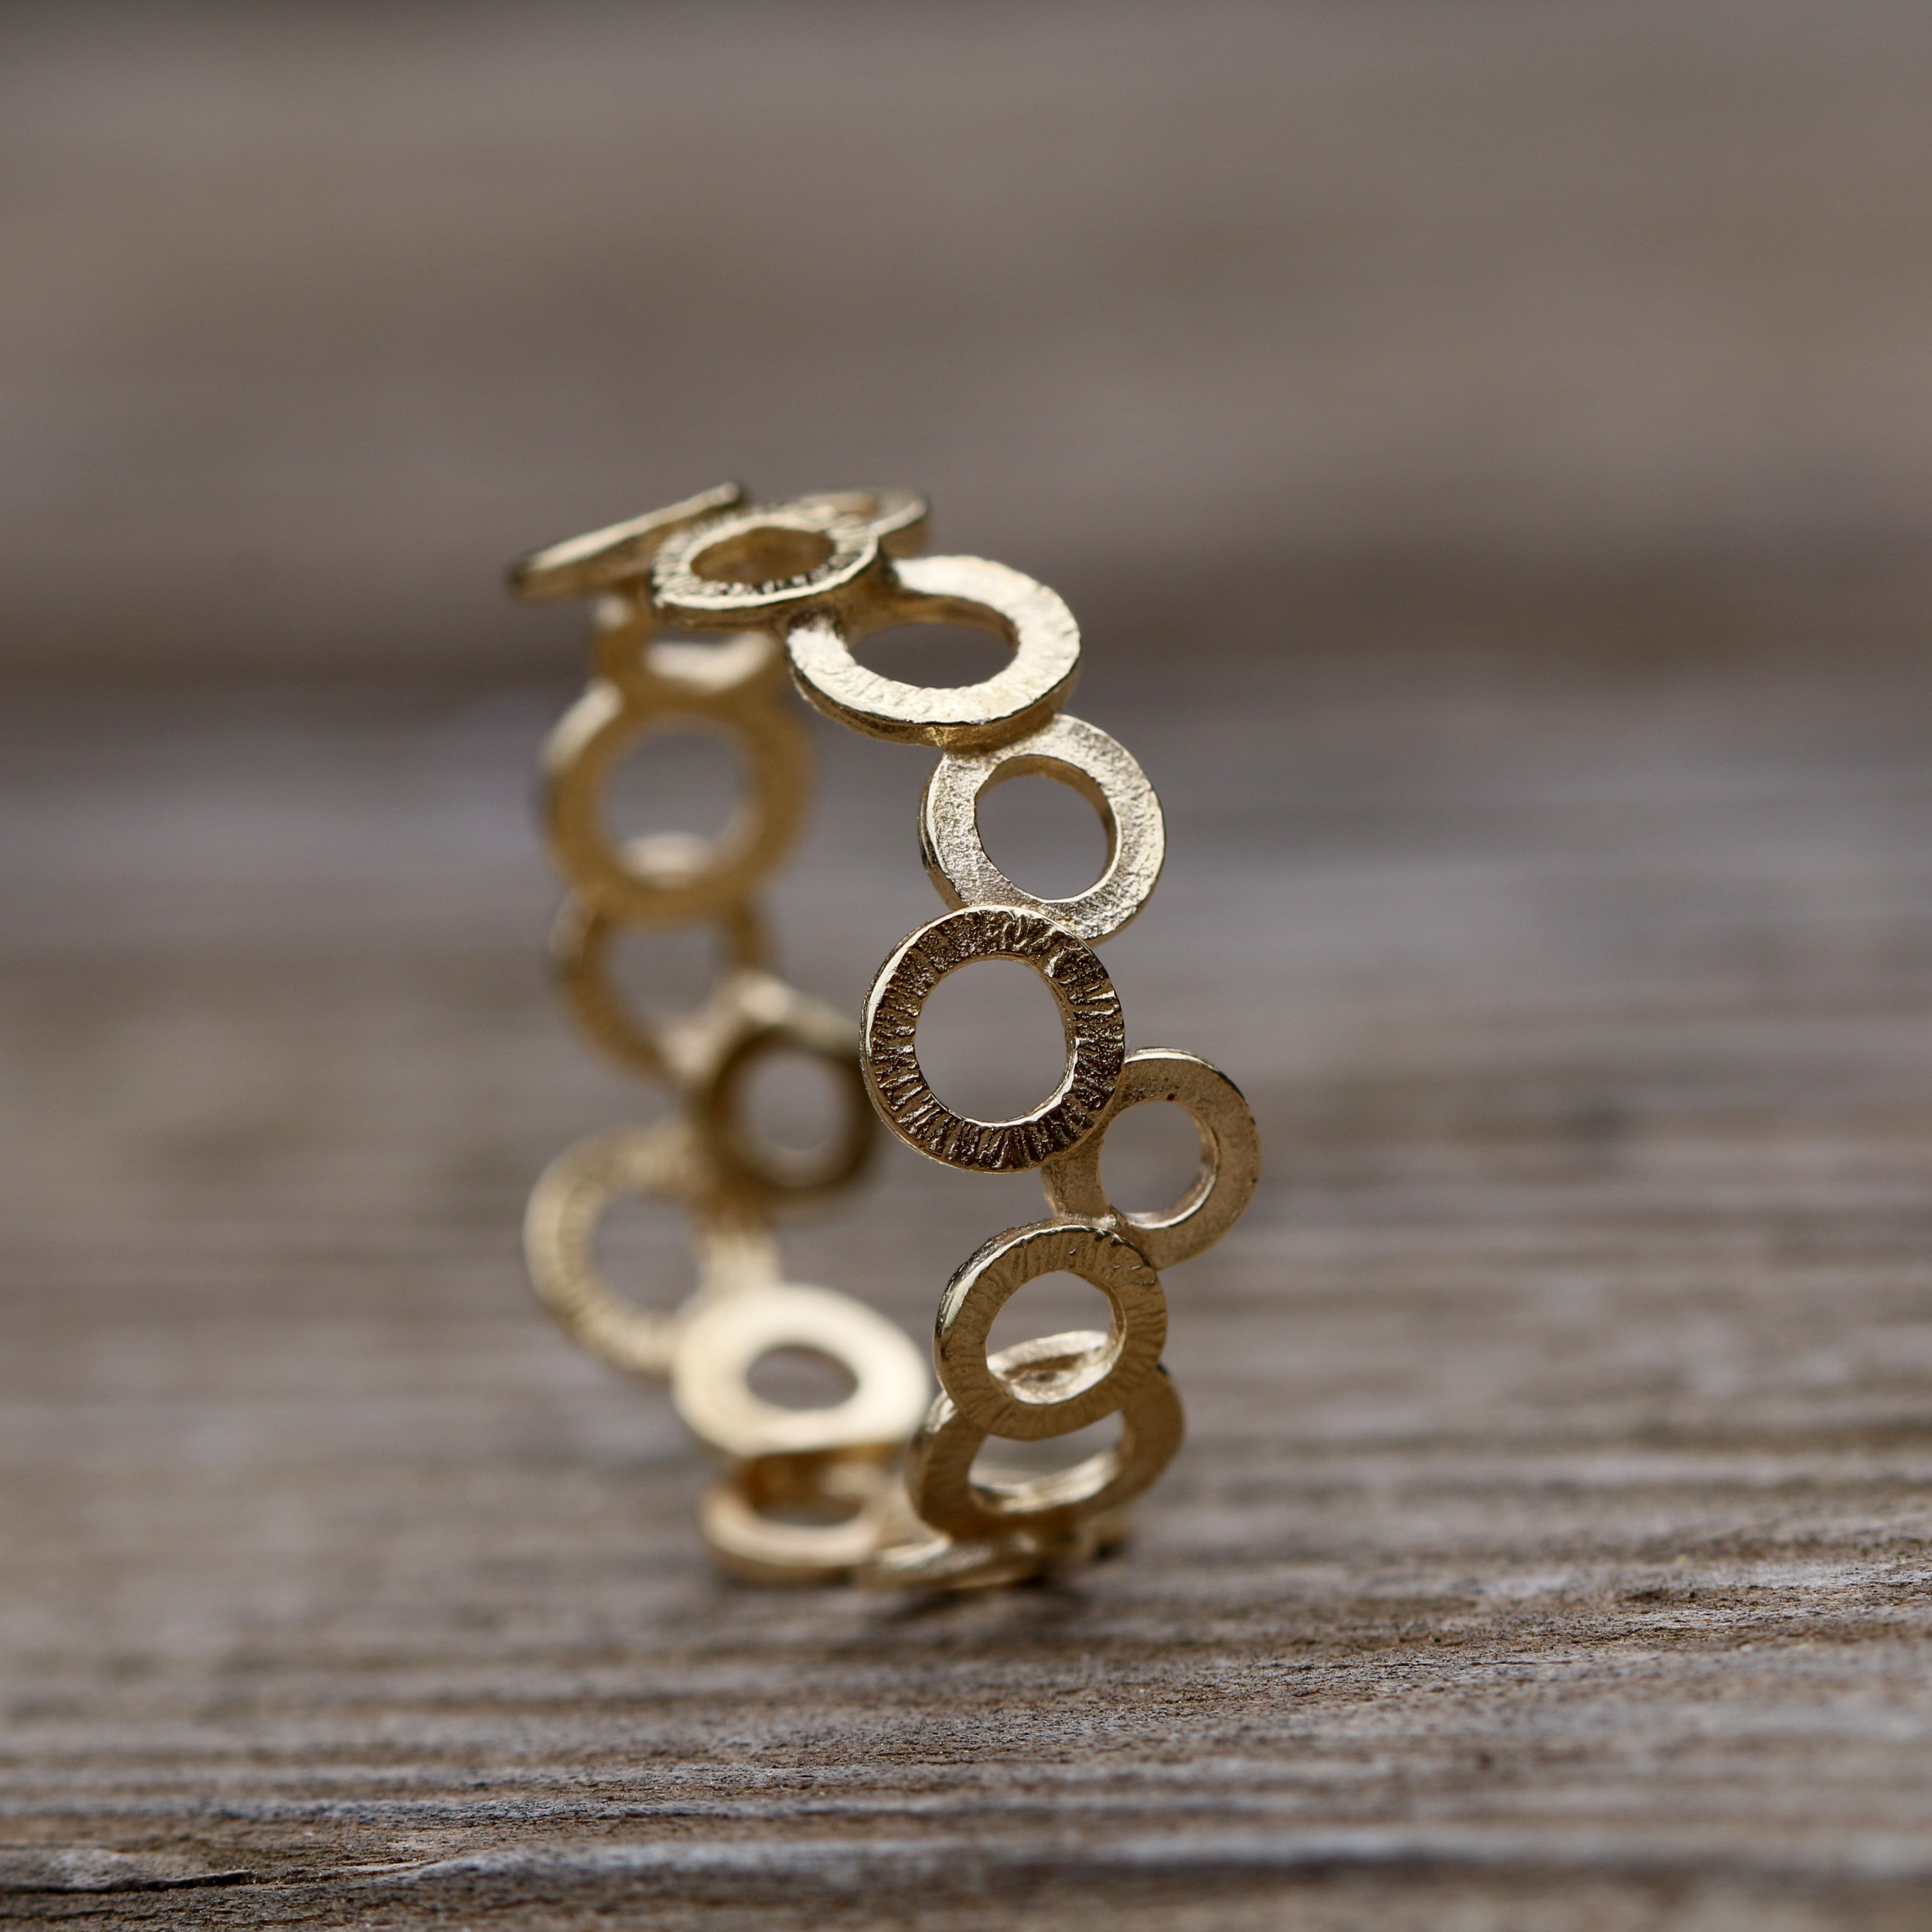 Chic Gold Filled Fashion Ring